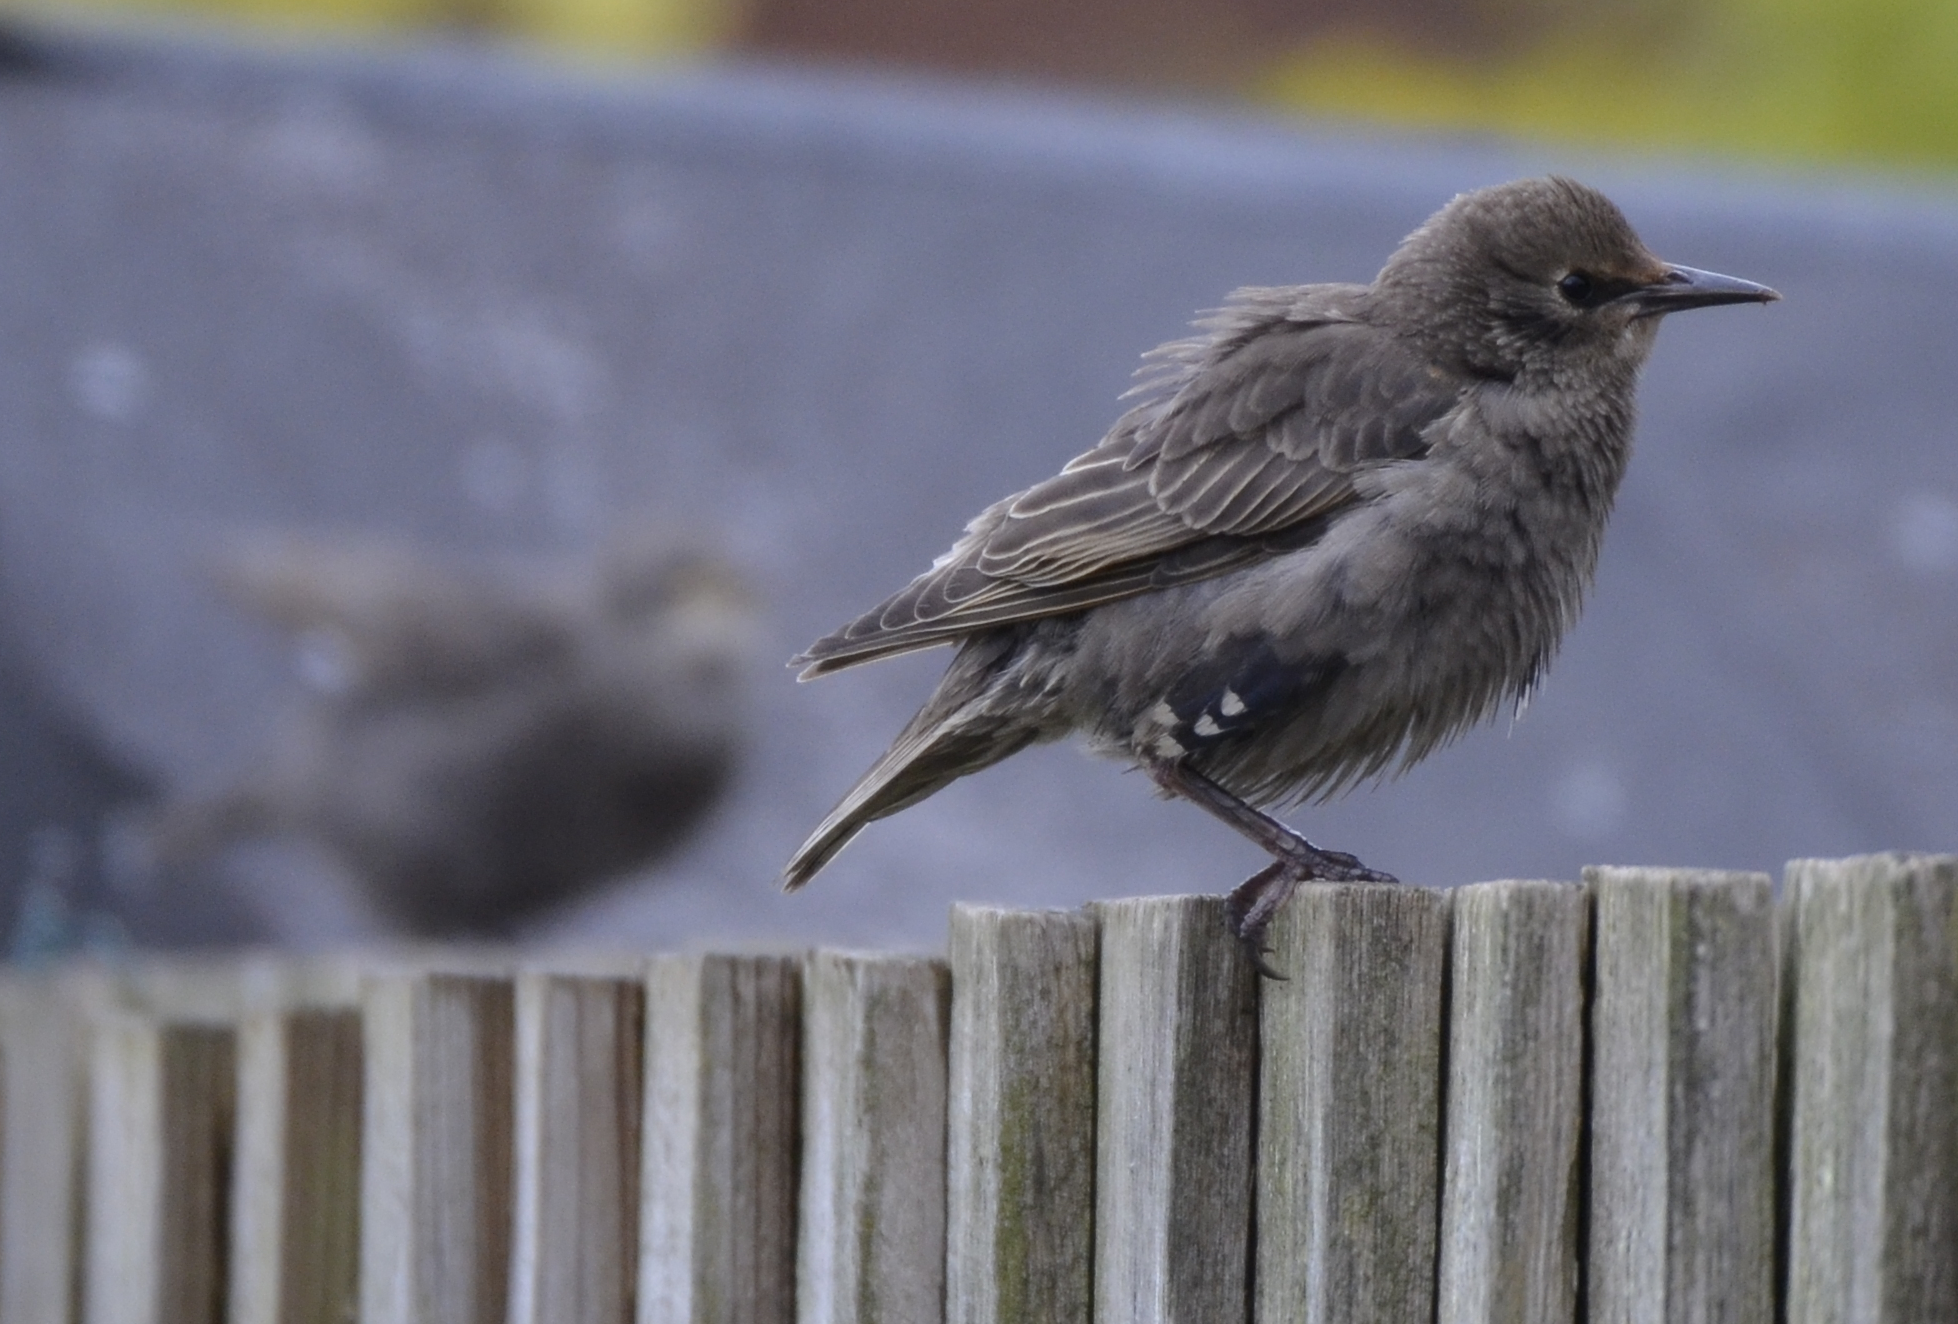 Starling juvenile on a fence